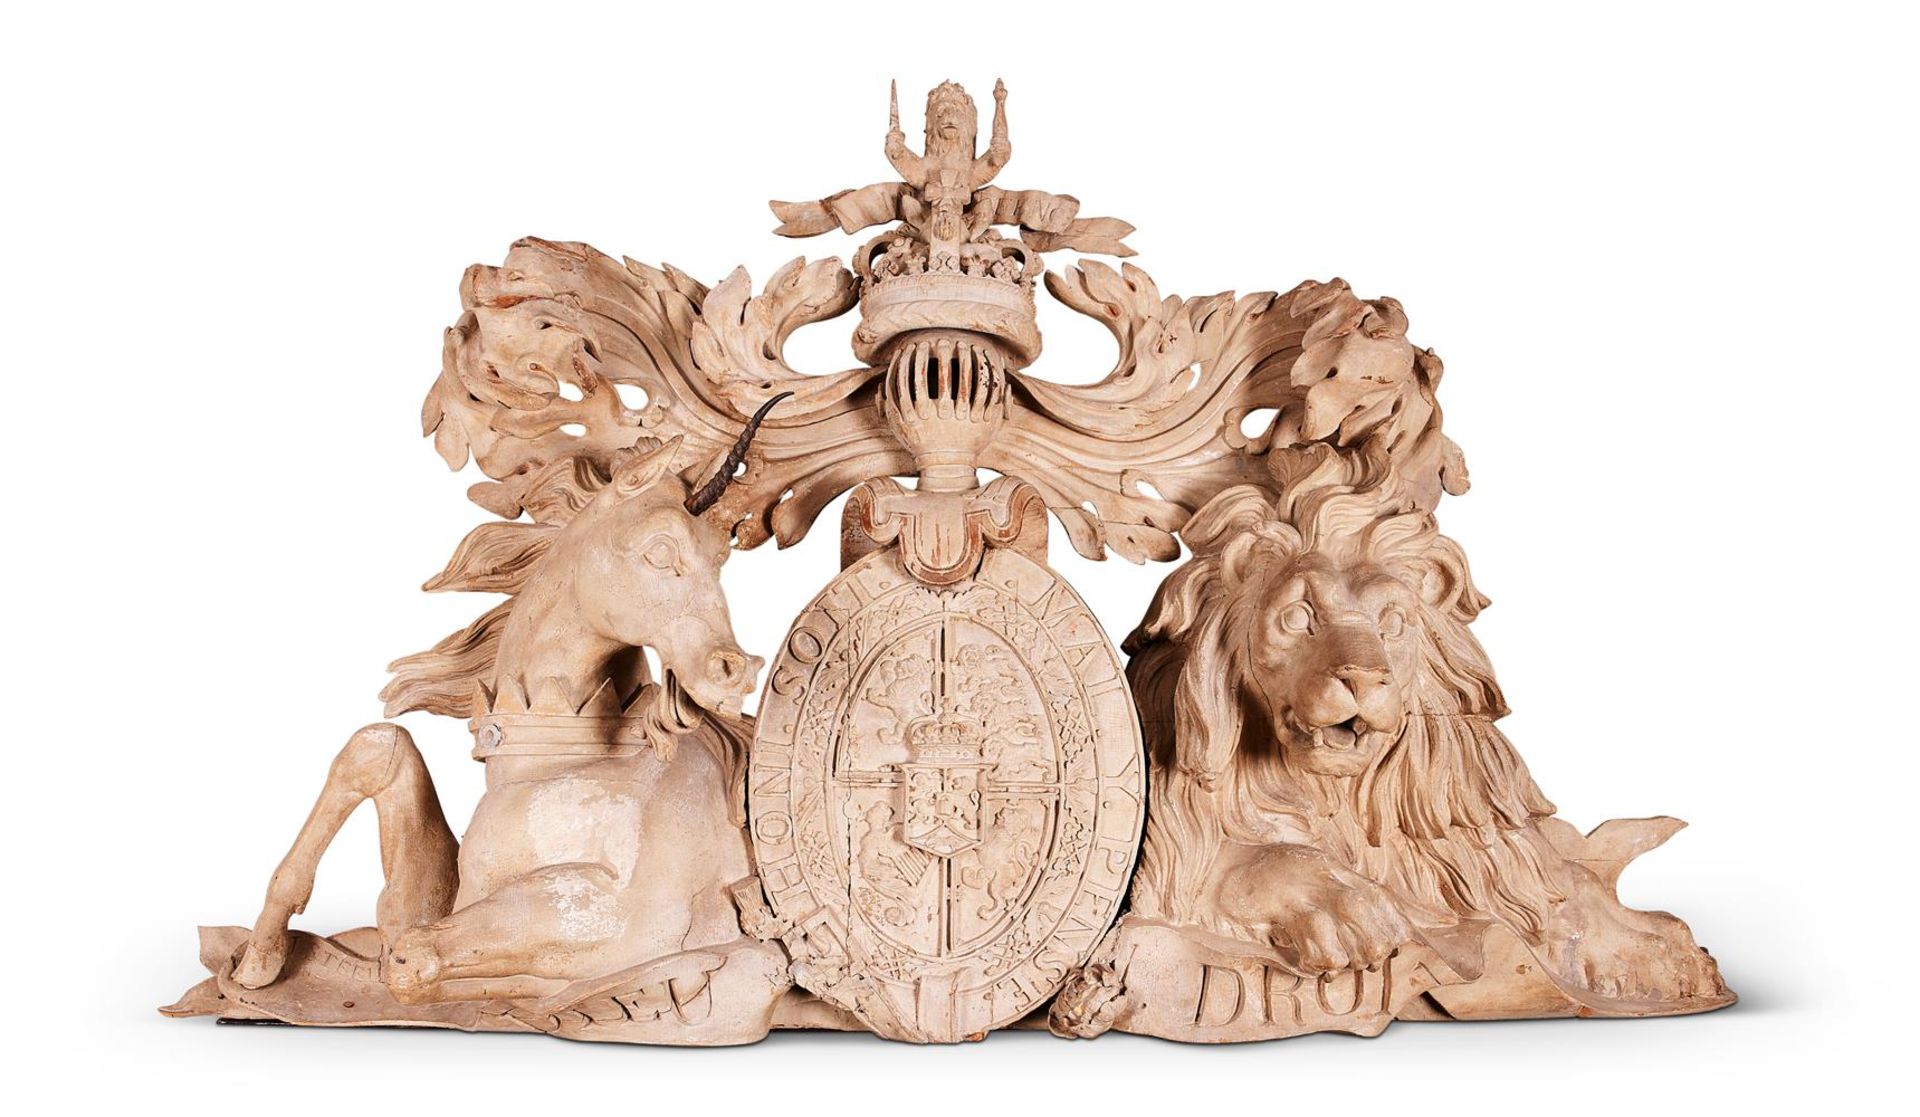 A RARE AND IMPRESSIVE REGENCY CARVED AND PAINTED WOOD SCOTTISH ROYAL COAT OF ARMS BY JOHN STEELL SNR